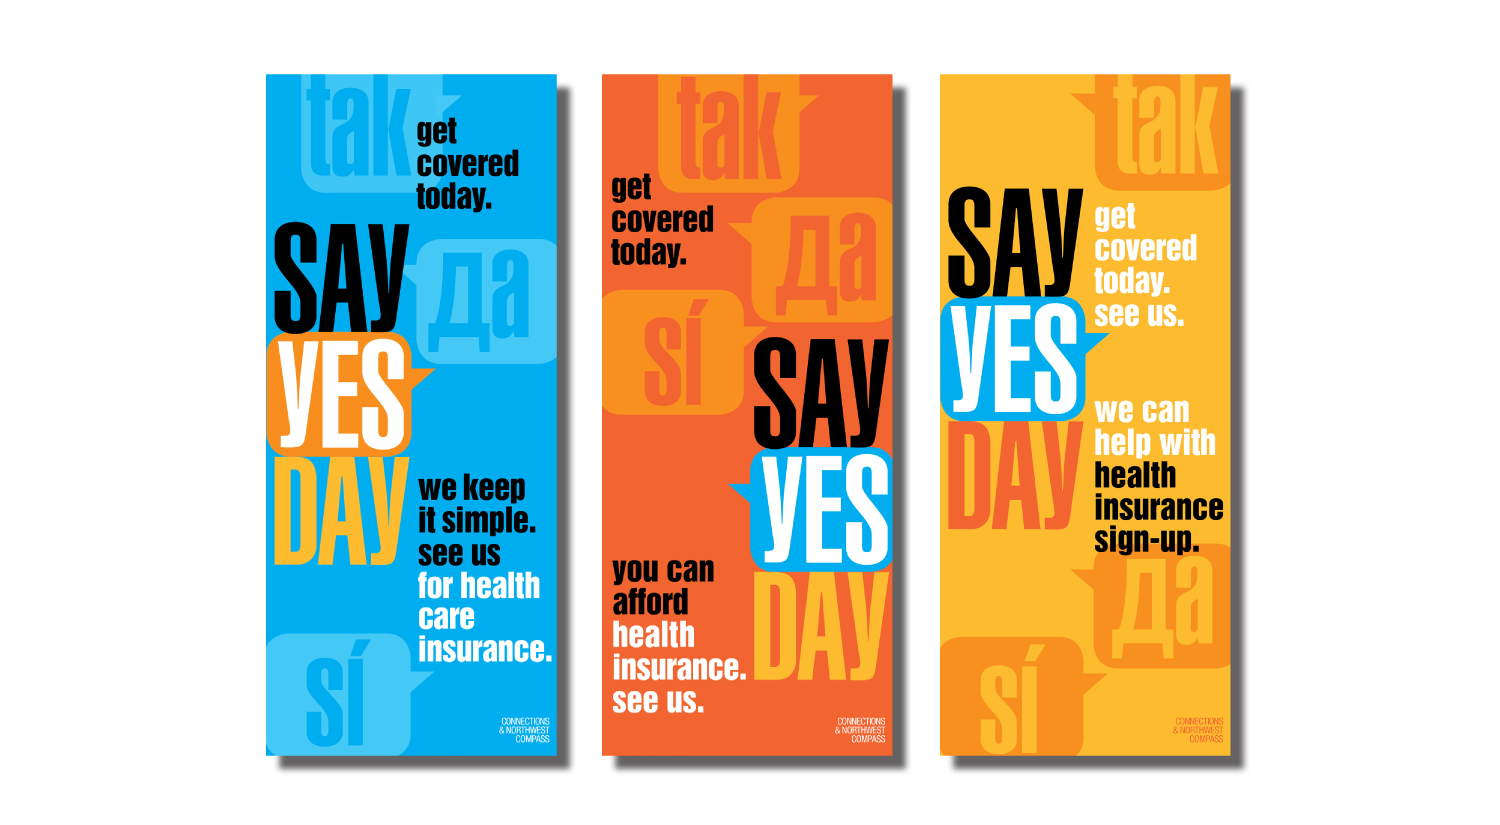 messagegallery-getcovered-3.png